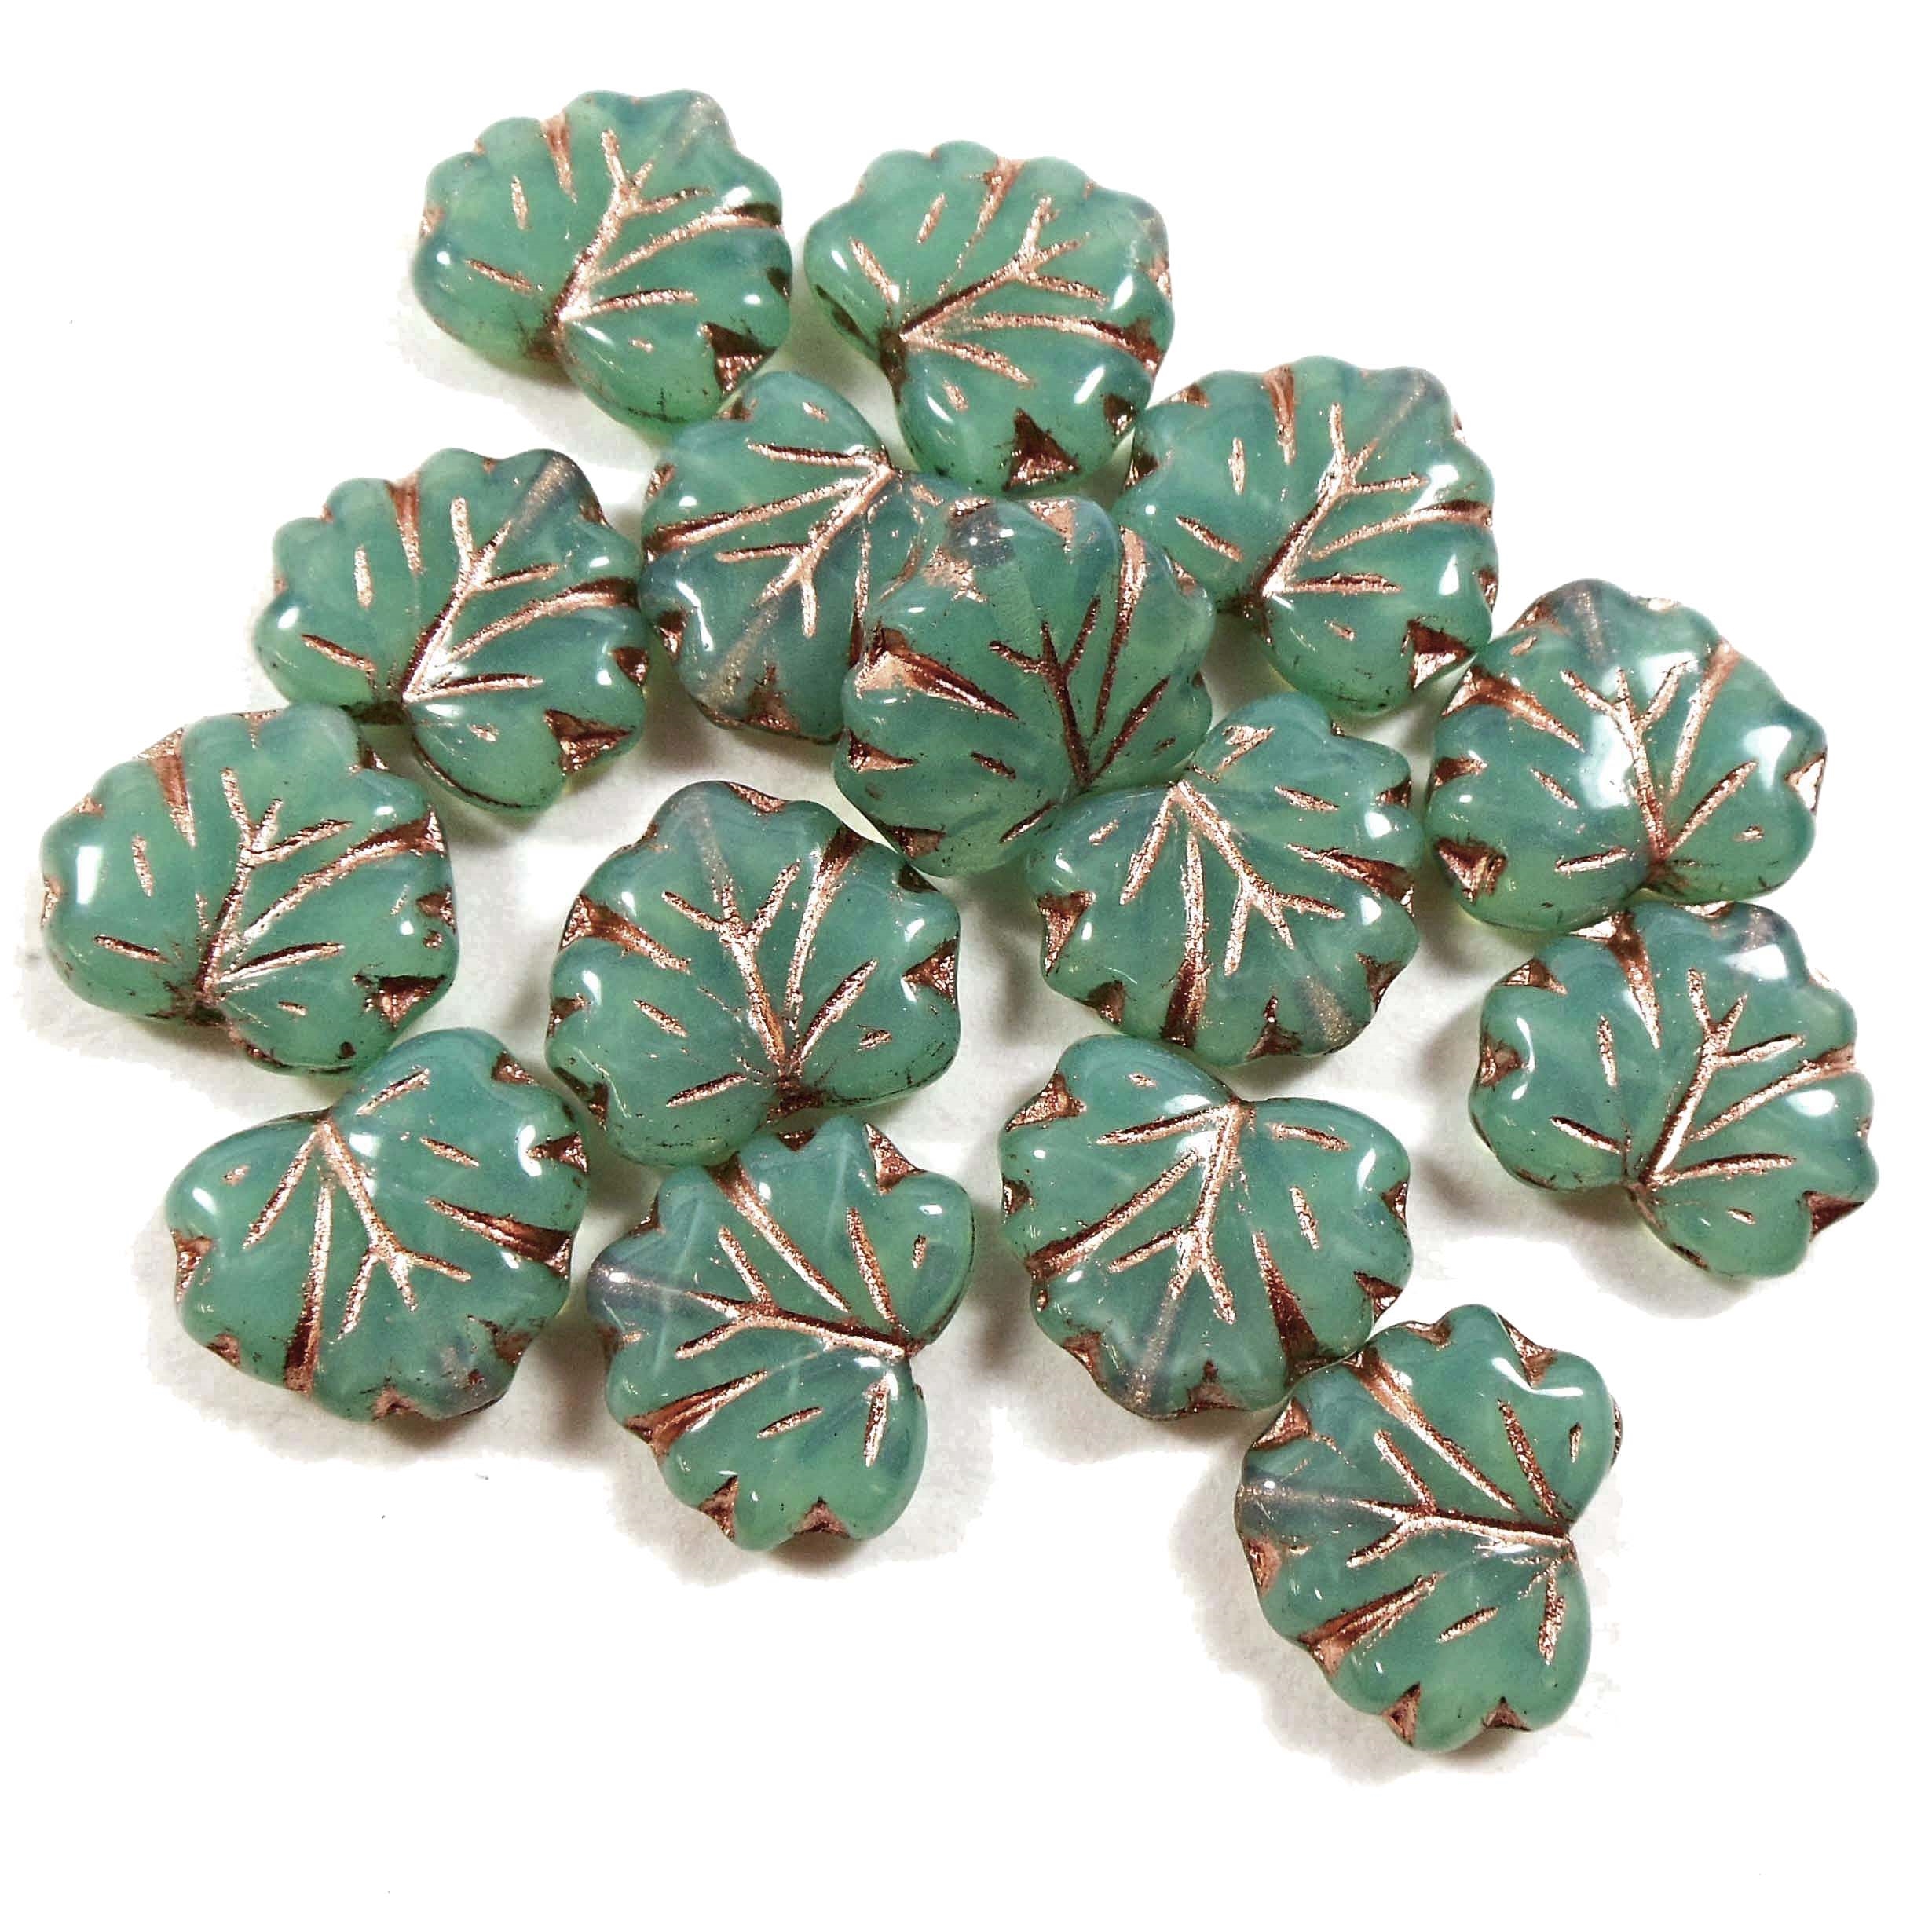 6pcs Opaque White Rustic Gold Patina Wash Large Flat Leaf Carved Beads Leaf Beads Czech Glass 18mm x 13mm